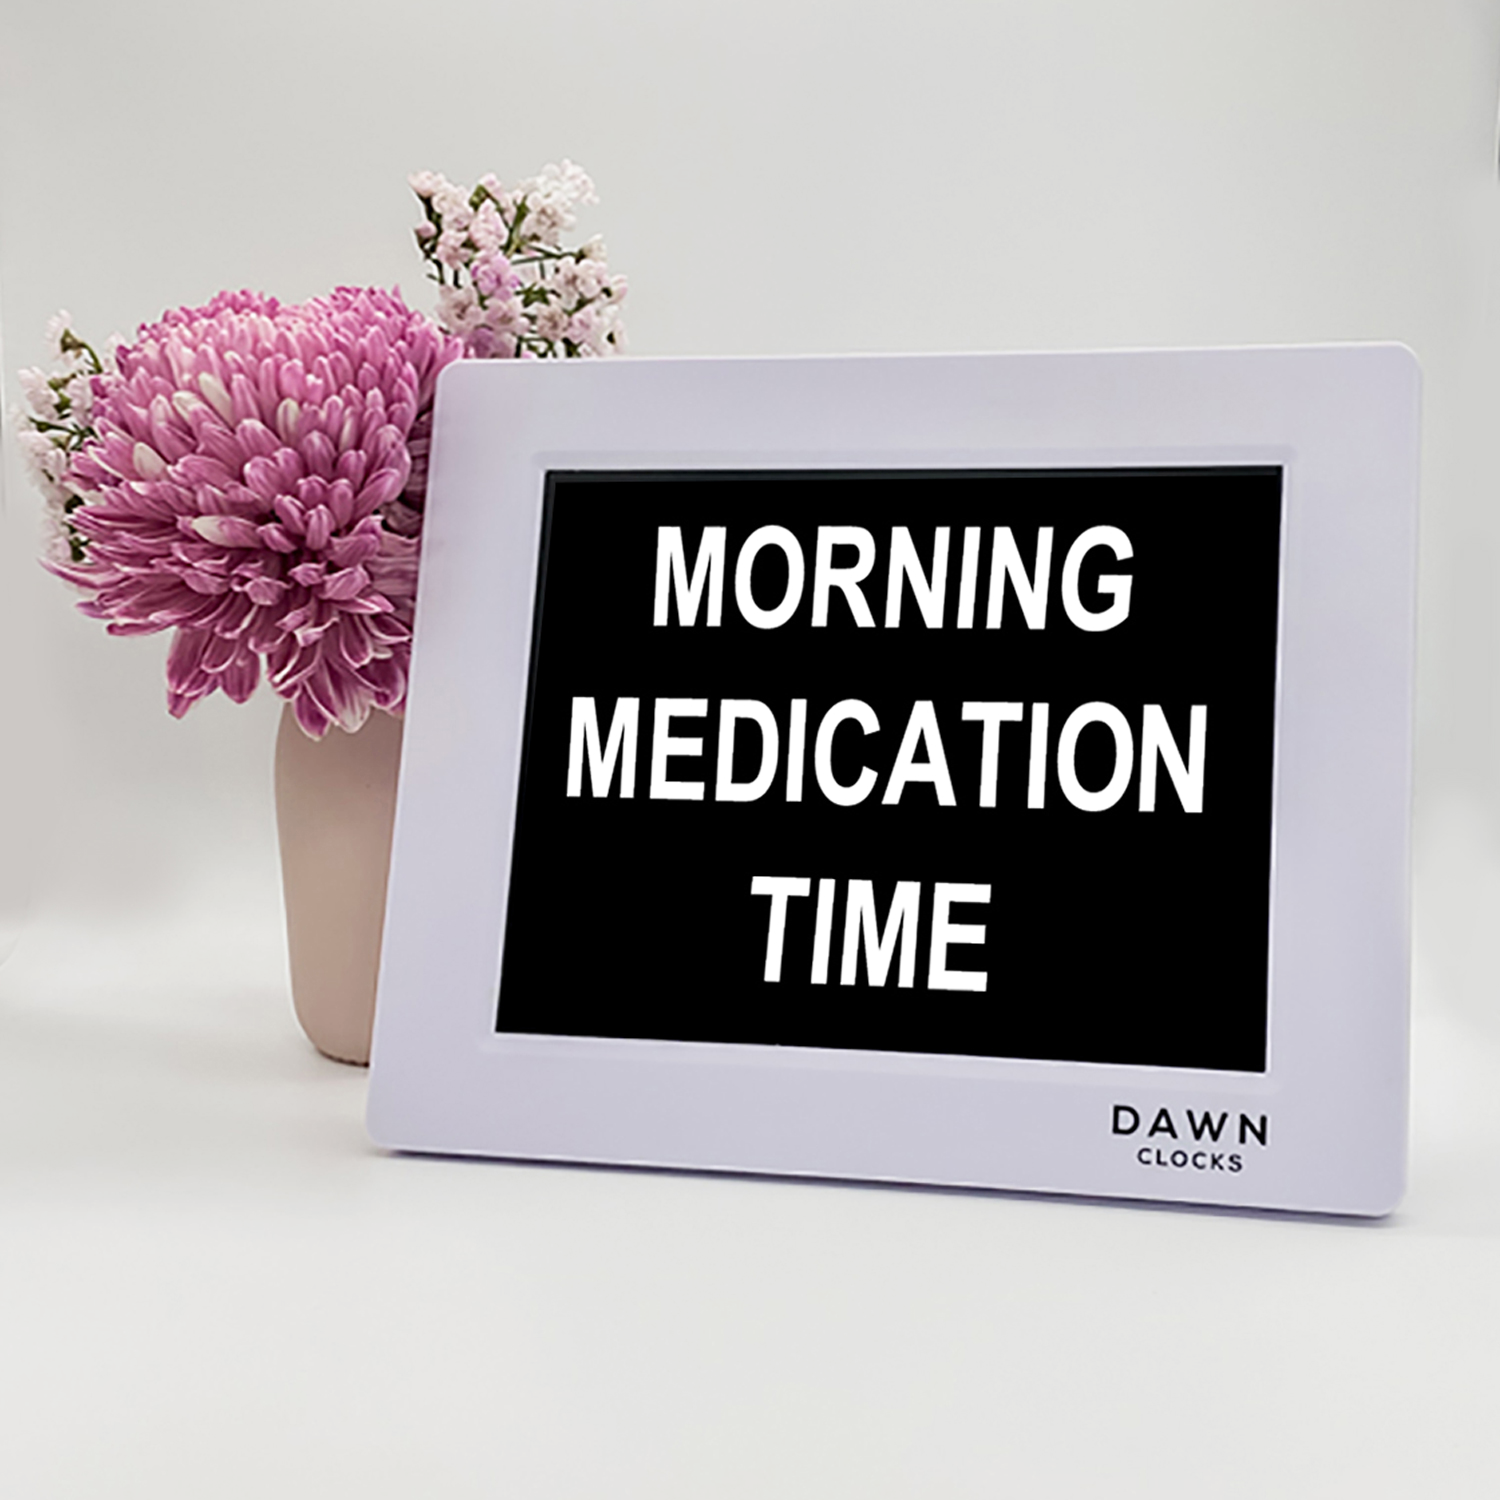 Original Dawn Clock shown on a table with the "Morning medication time" reminder on the screen. This is ideal for all ages and proved essential for NDIS participants, people living with Dementia, people living with a disability and seniors.